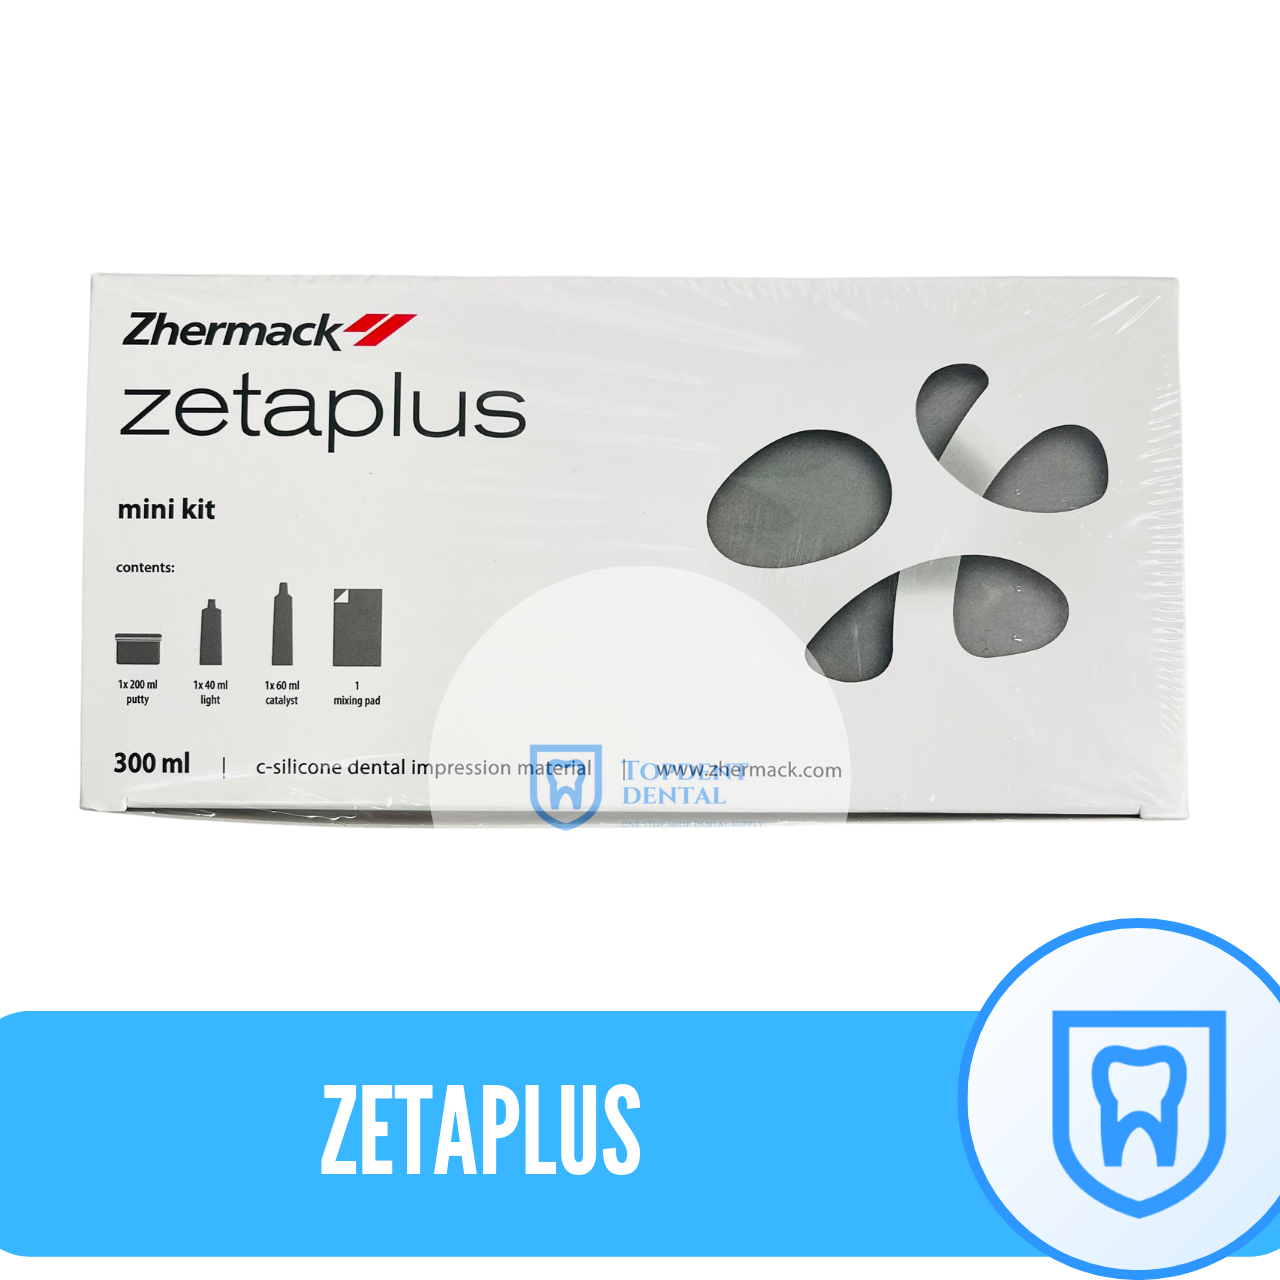 Zhermack Zetaplus Putty C Silicone Dental Impression Material at